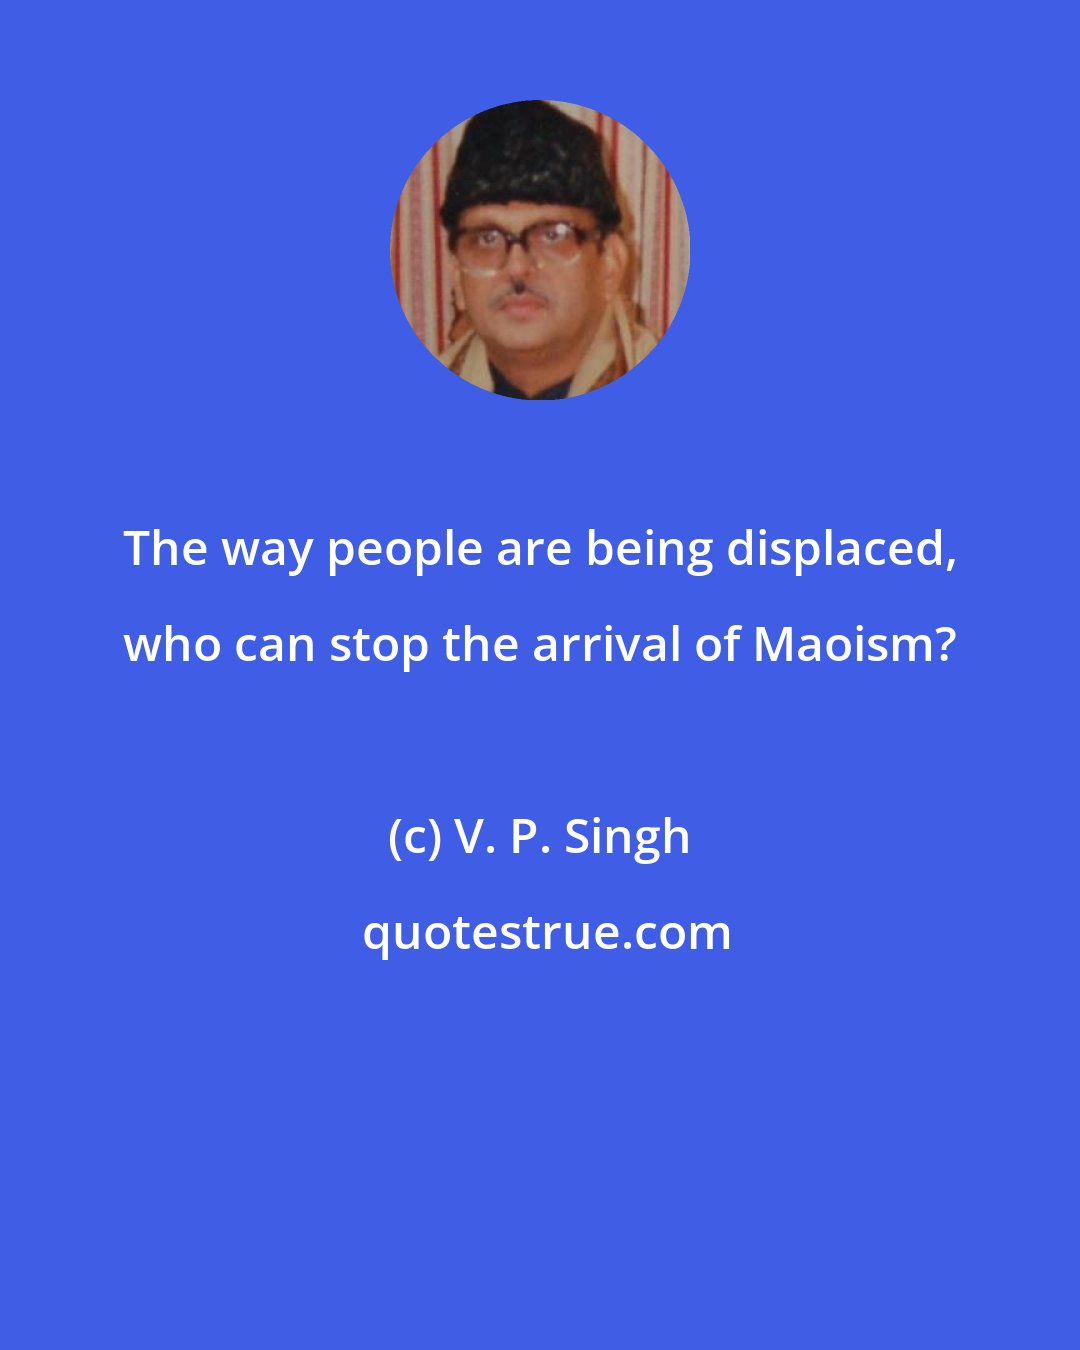 V. P. Singh: The way people are being displaced, who can stop the arrival of Maoism?